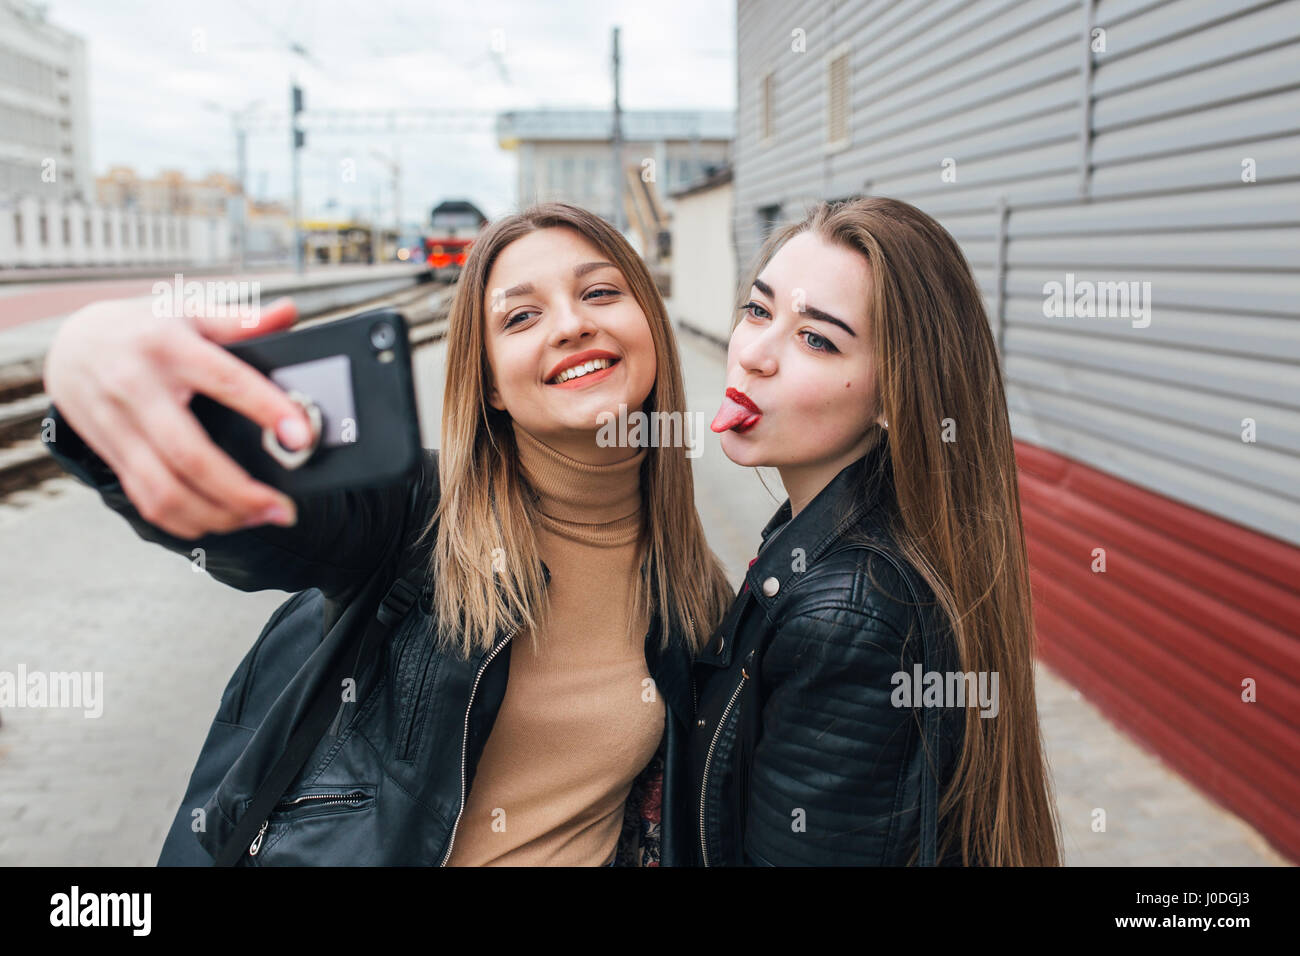 Two young girls taking selfie using smartphone Stock Photo